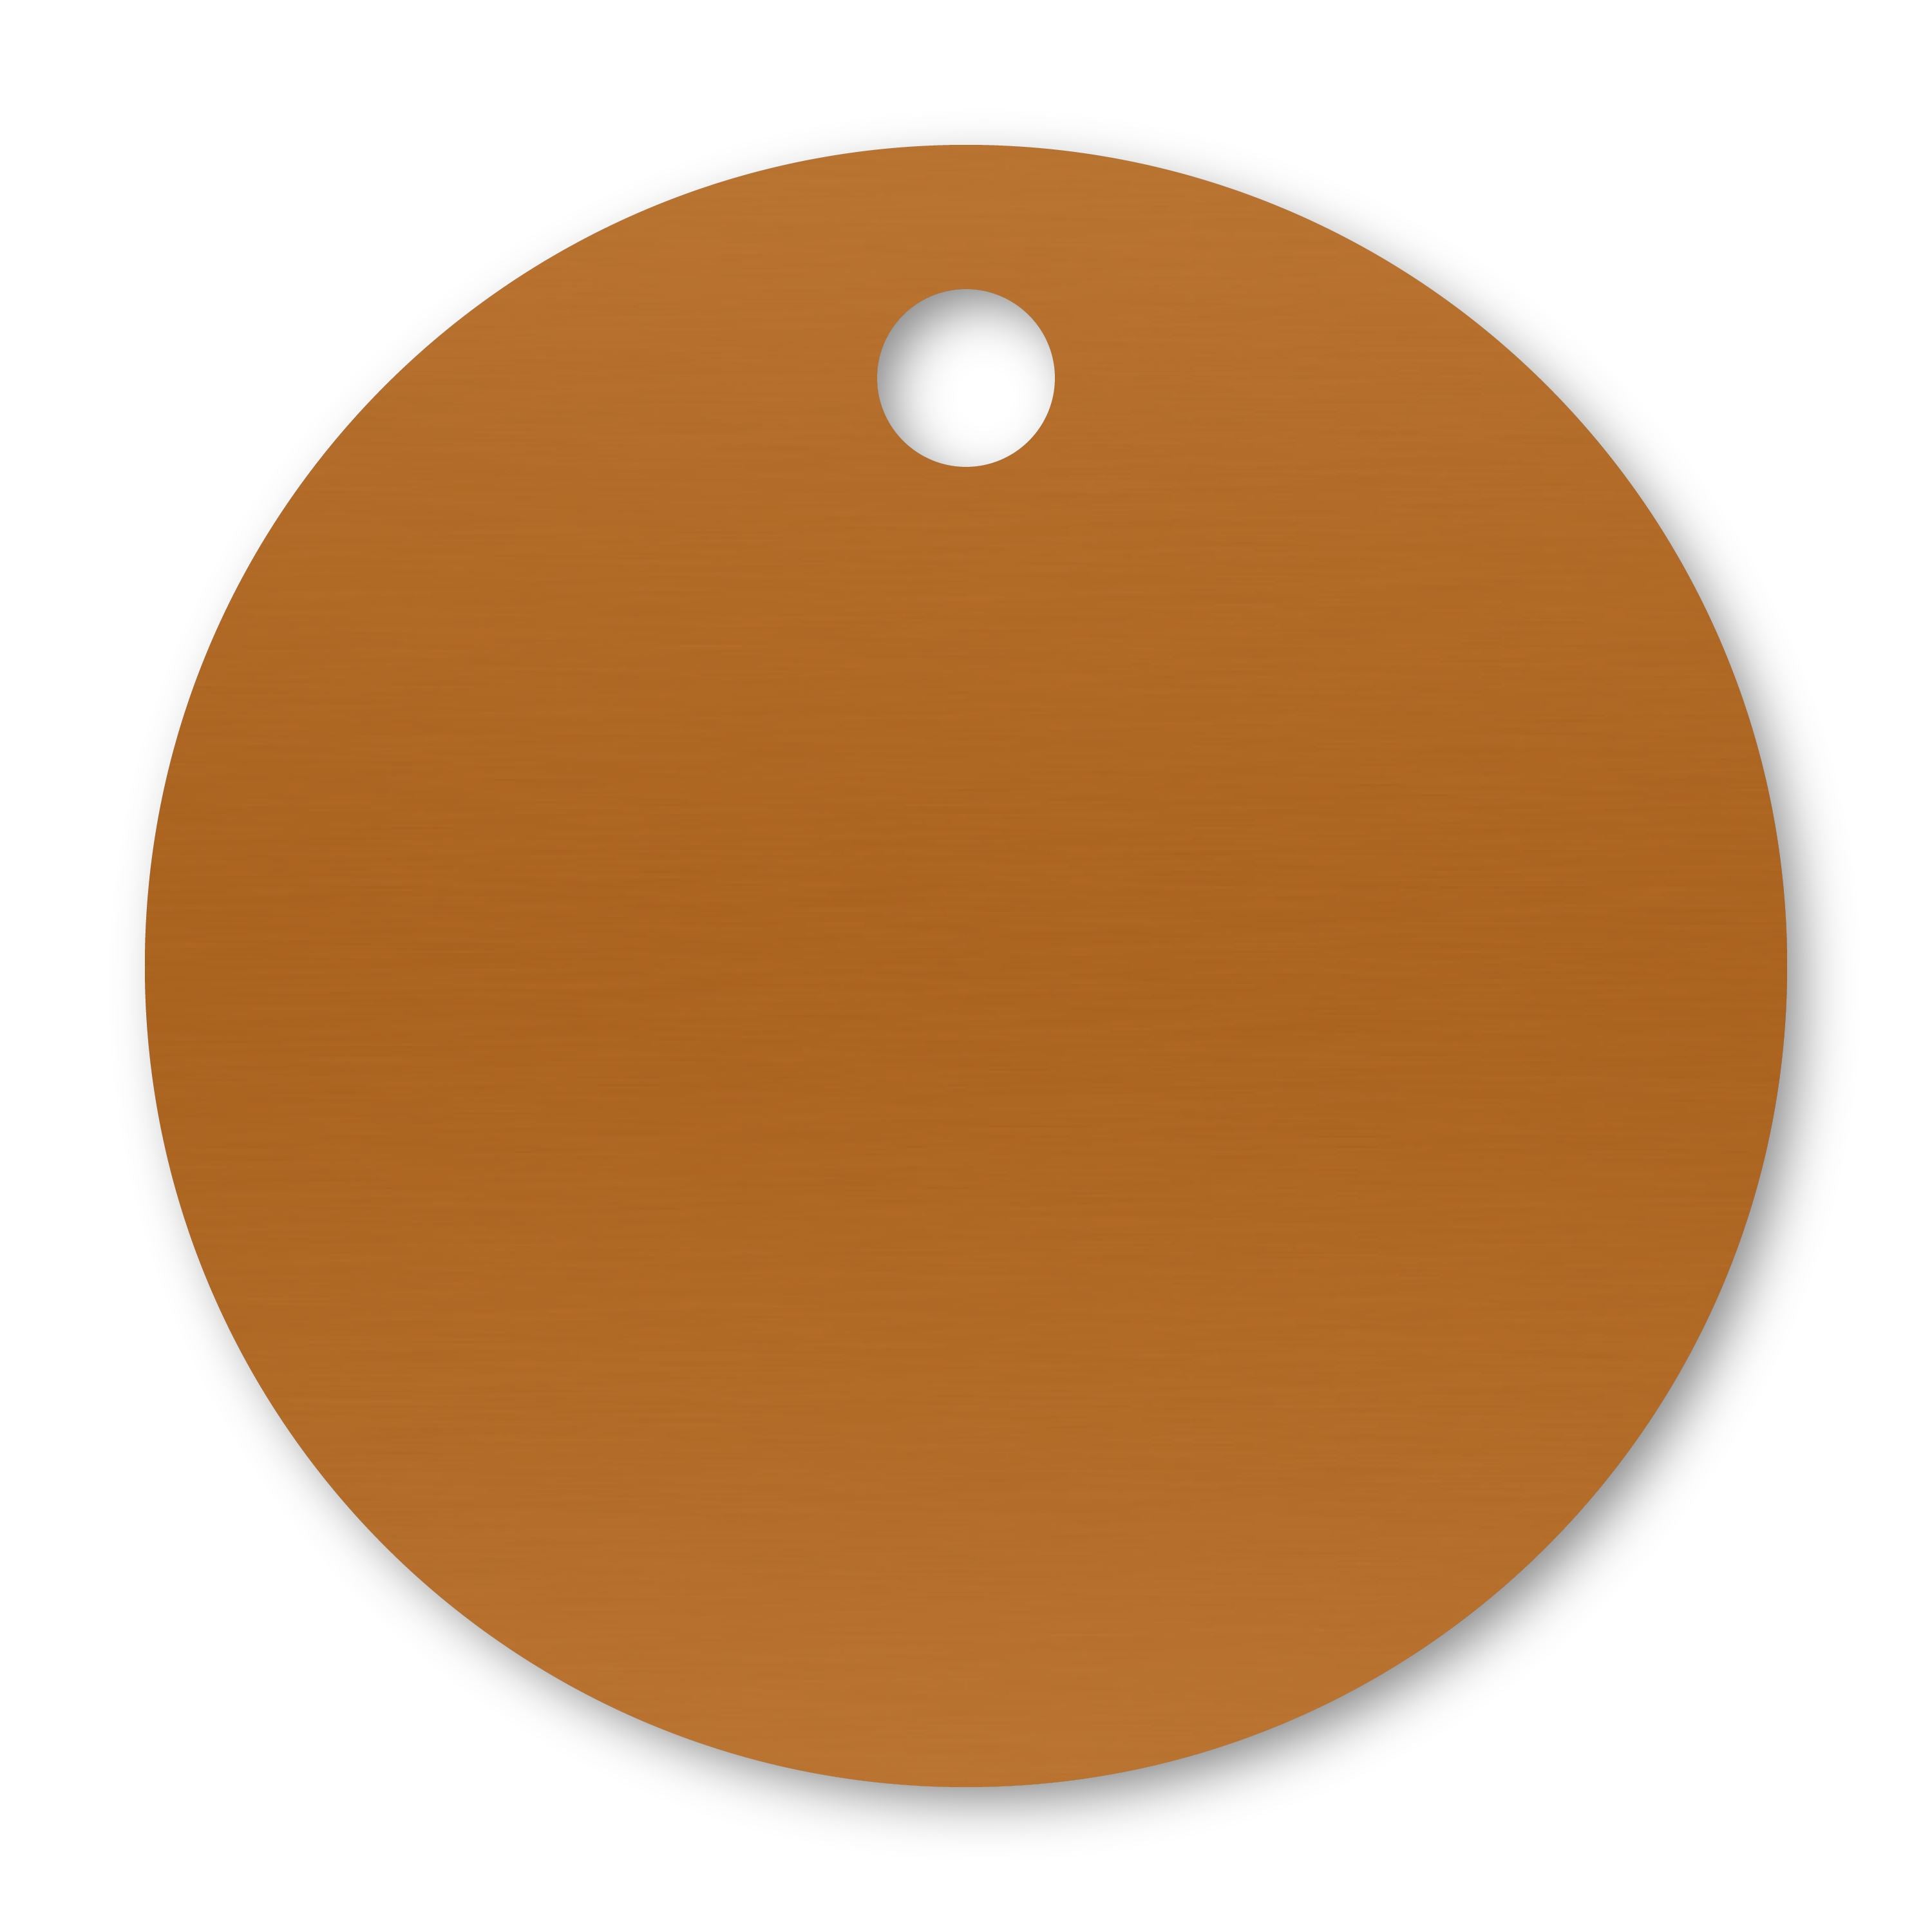 Anodized Aluminum Round Tags, 1" with 1/8" Hole, Laser Engraved Metal Tags Craftworks NW Orange 